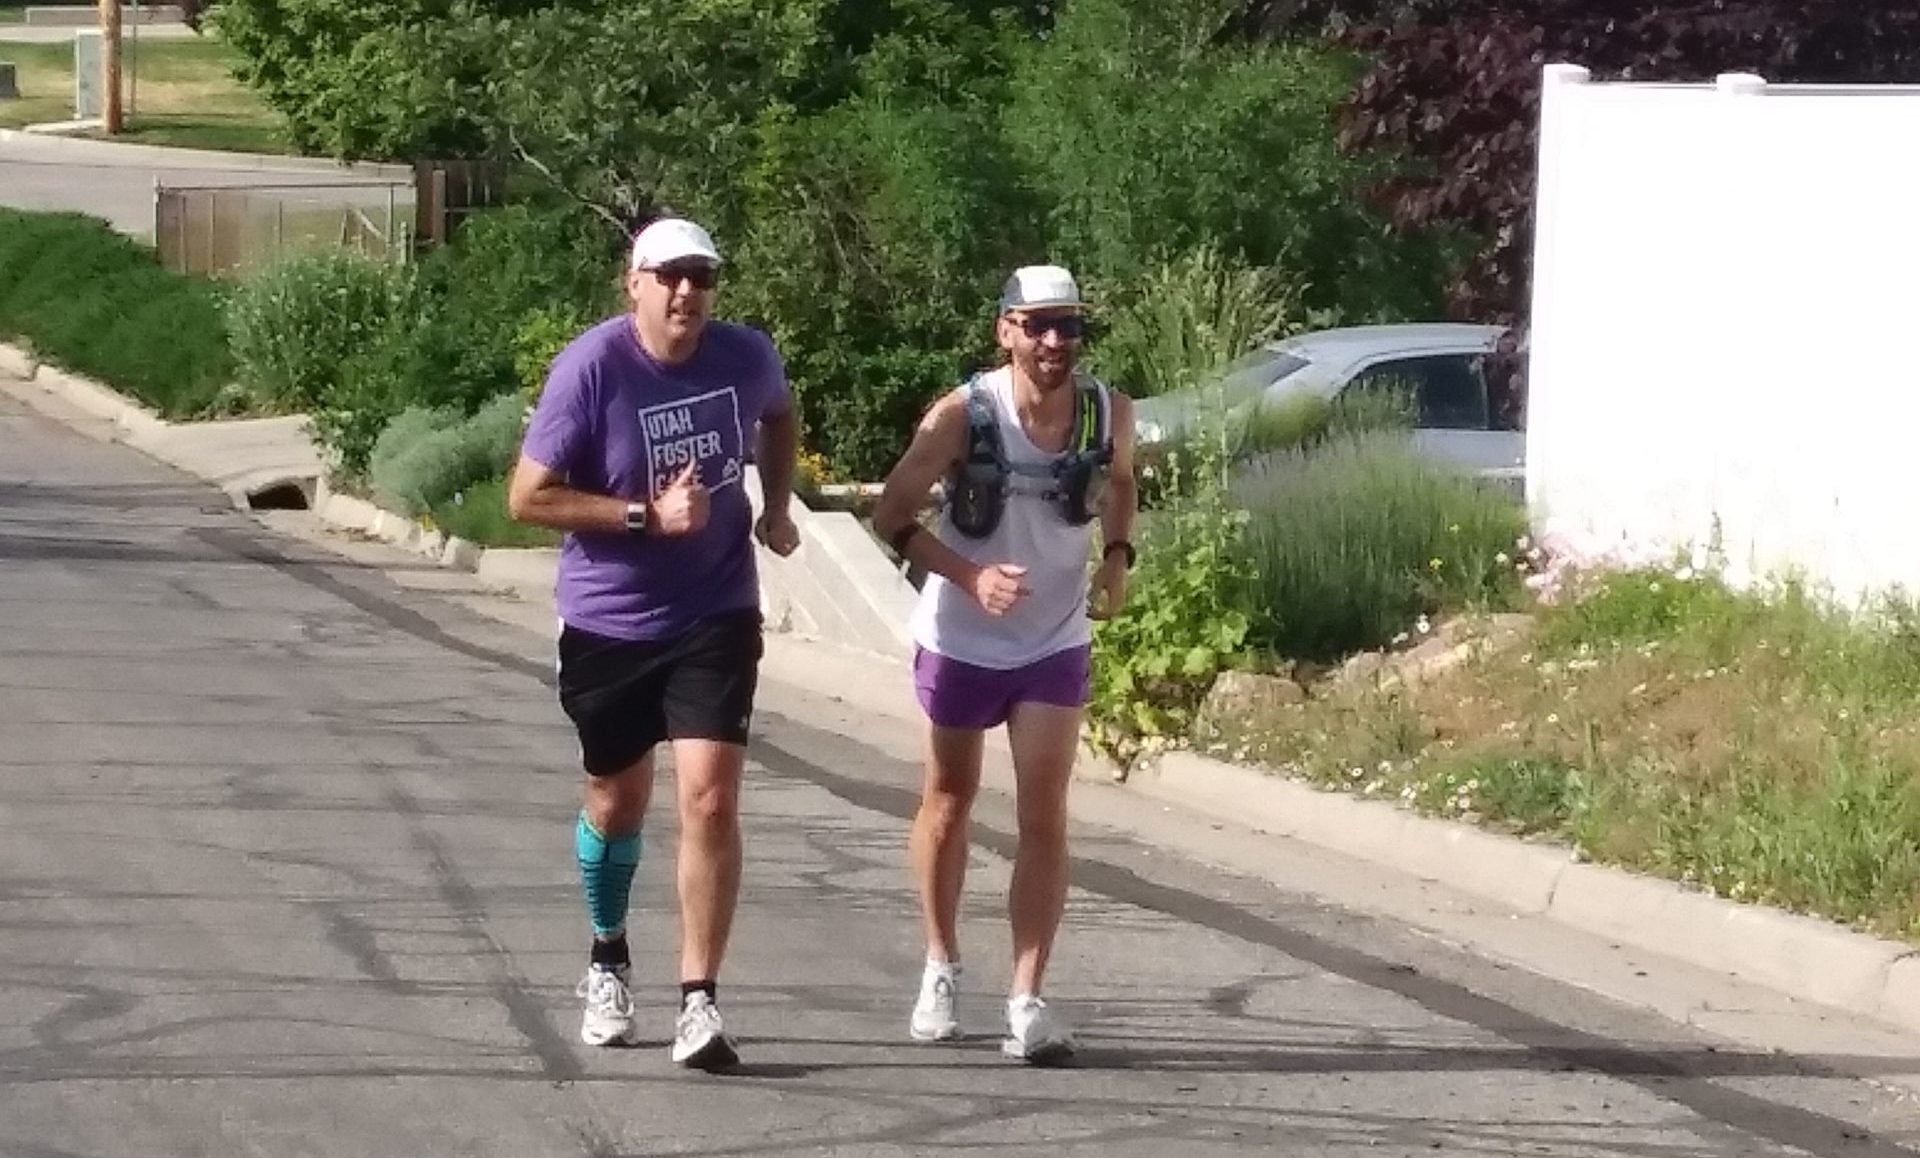 Utah Foster Care CEO, Mike Hamblin runs with Aaron Topance for his birthday fundraiser